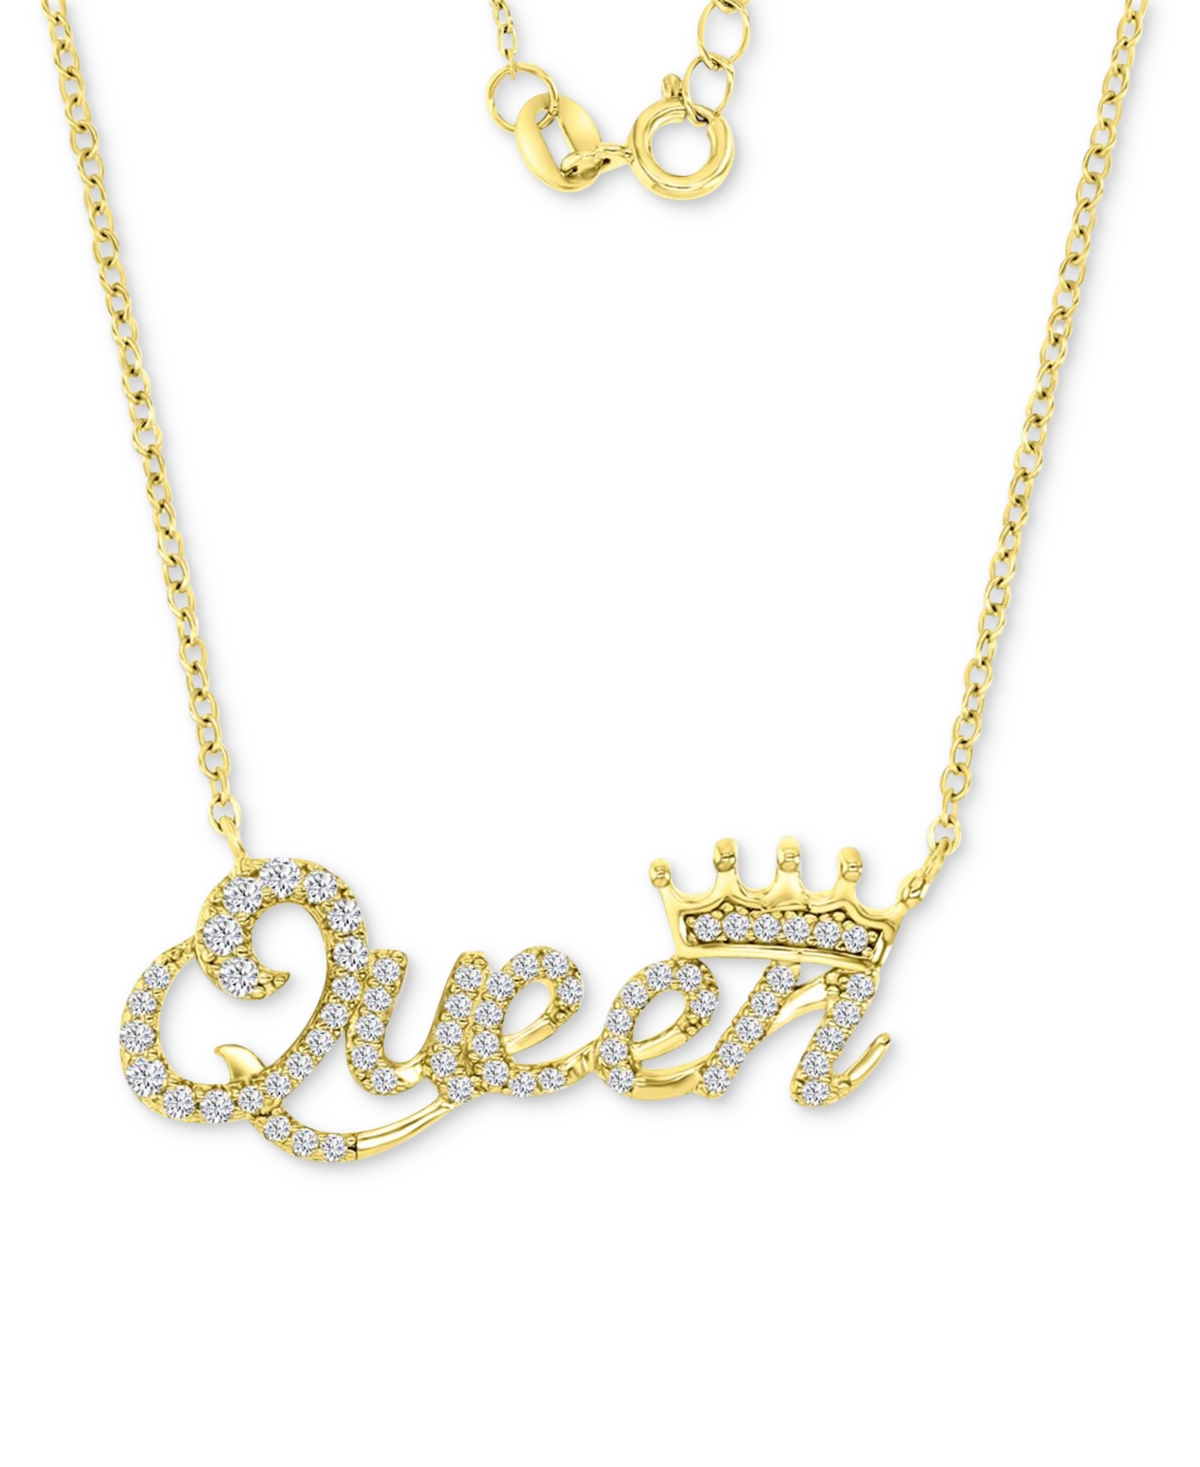 Cubic Zirconia Queen & Crown Pendant Necklace in 14k Gold-Plated Sterling Silver, 16" + 2" extender - Gold